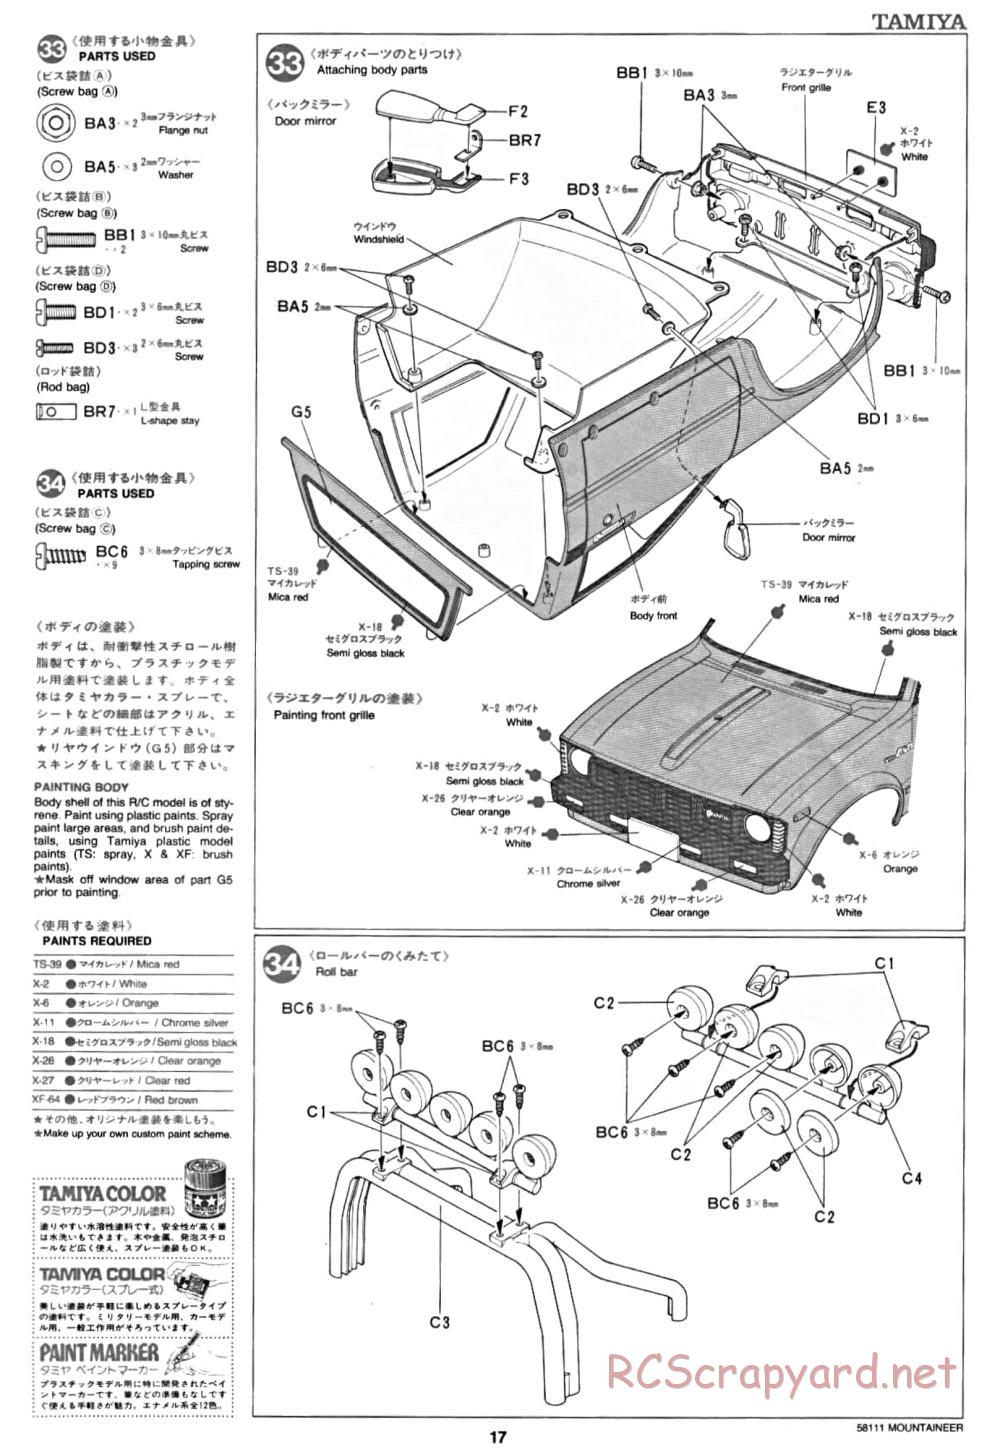 Tamiya - Toyota 4x4 Pick Up Mountaineer Chassis - Manual - Page 17